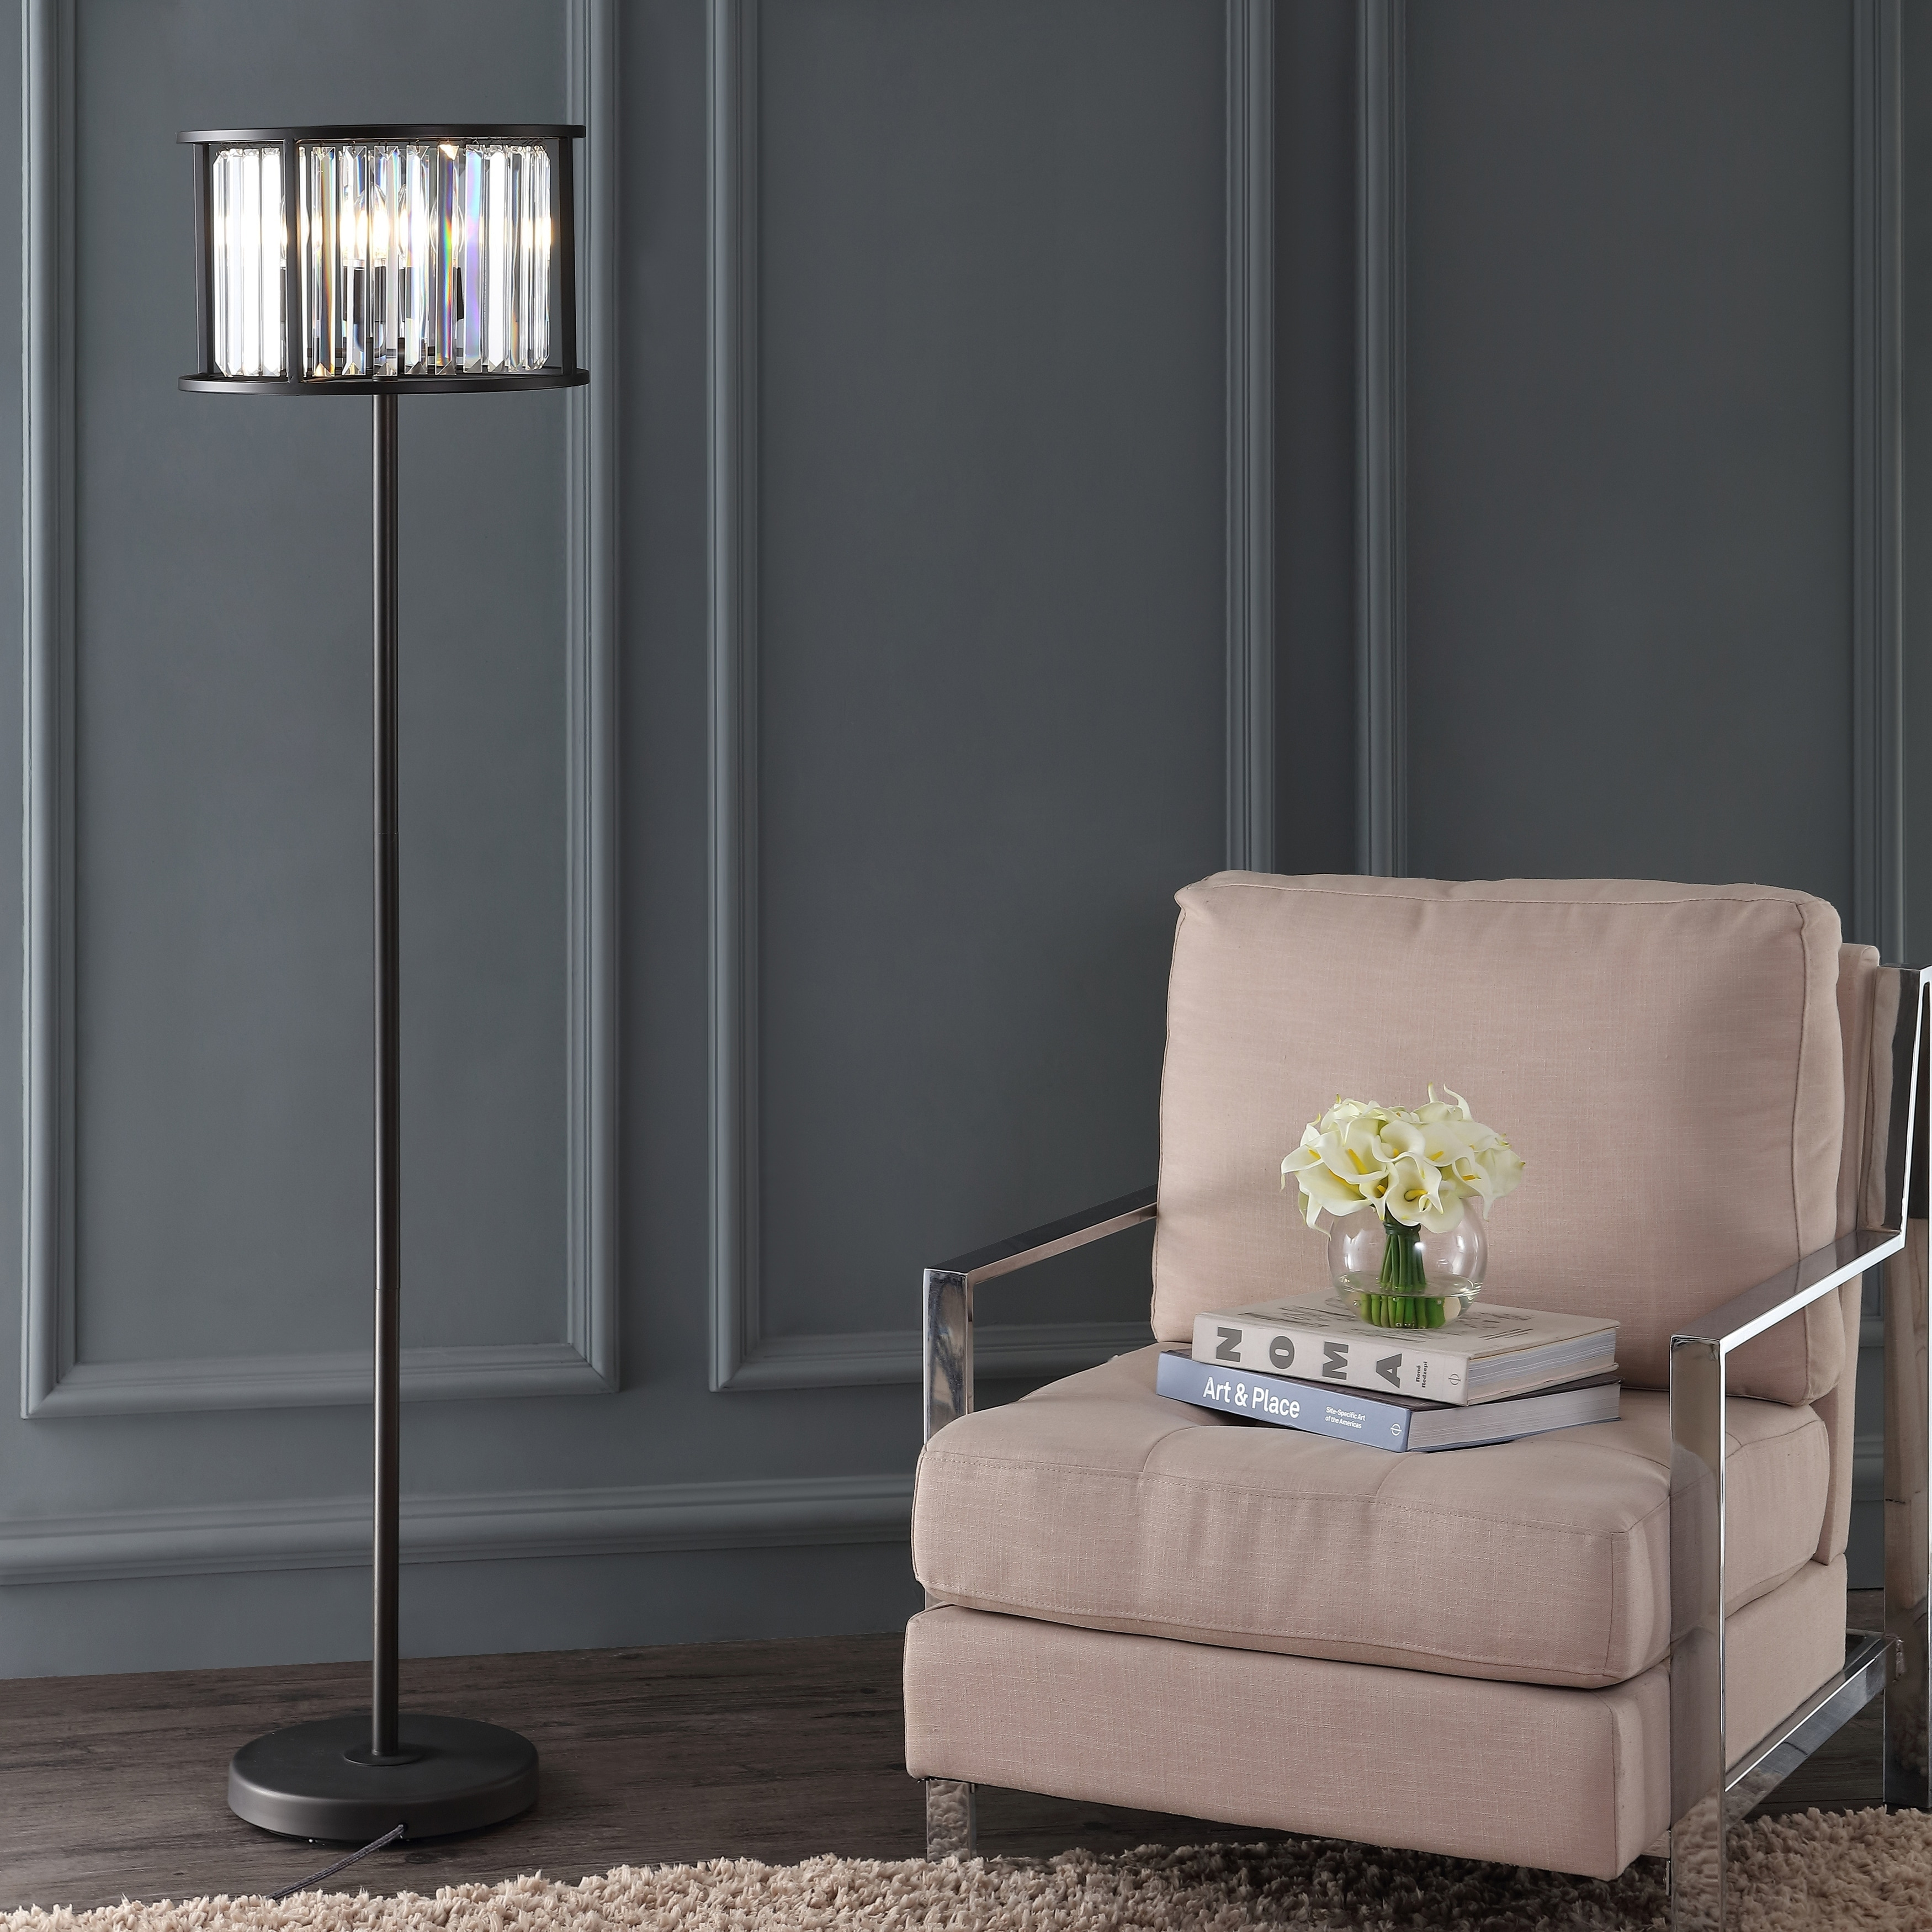 Bevin 63 Metalcrystal Led Floor Lamp Oil Rubbed Bronze throughout size 3500 X 3500